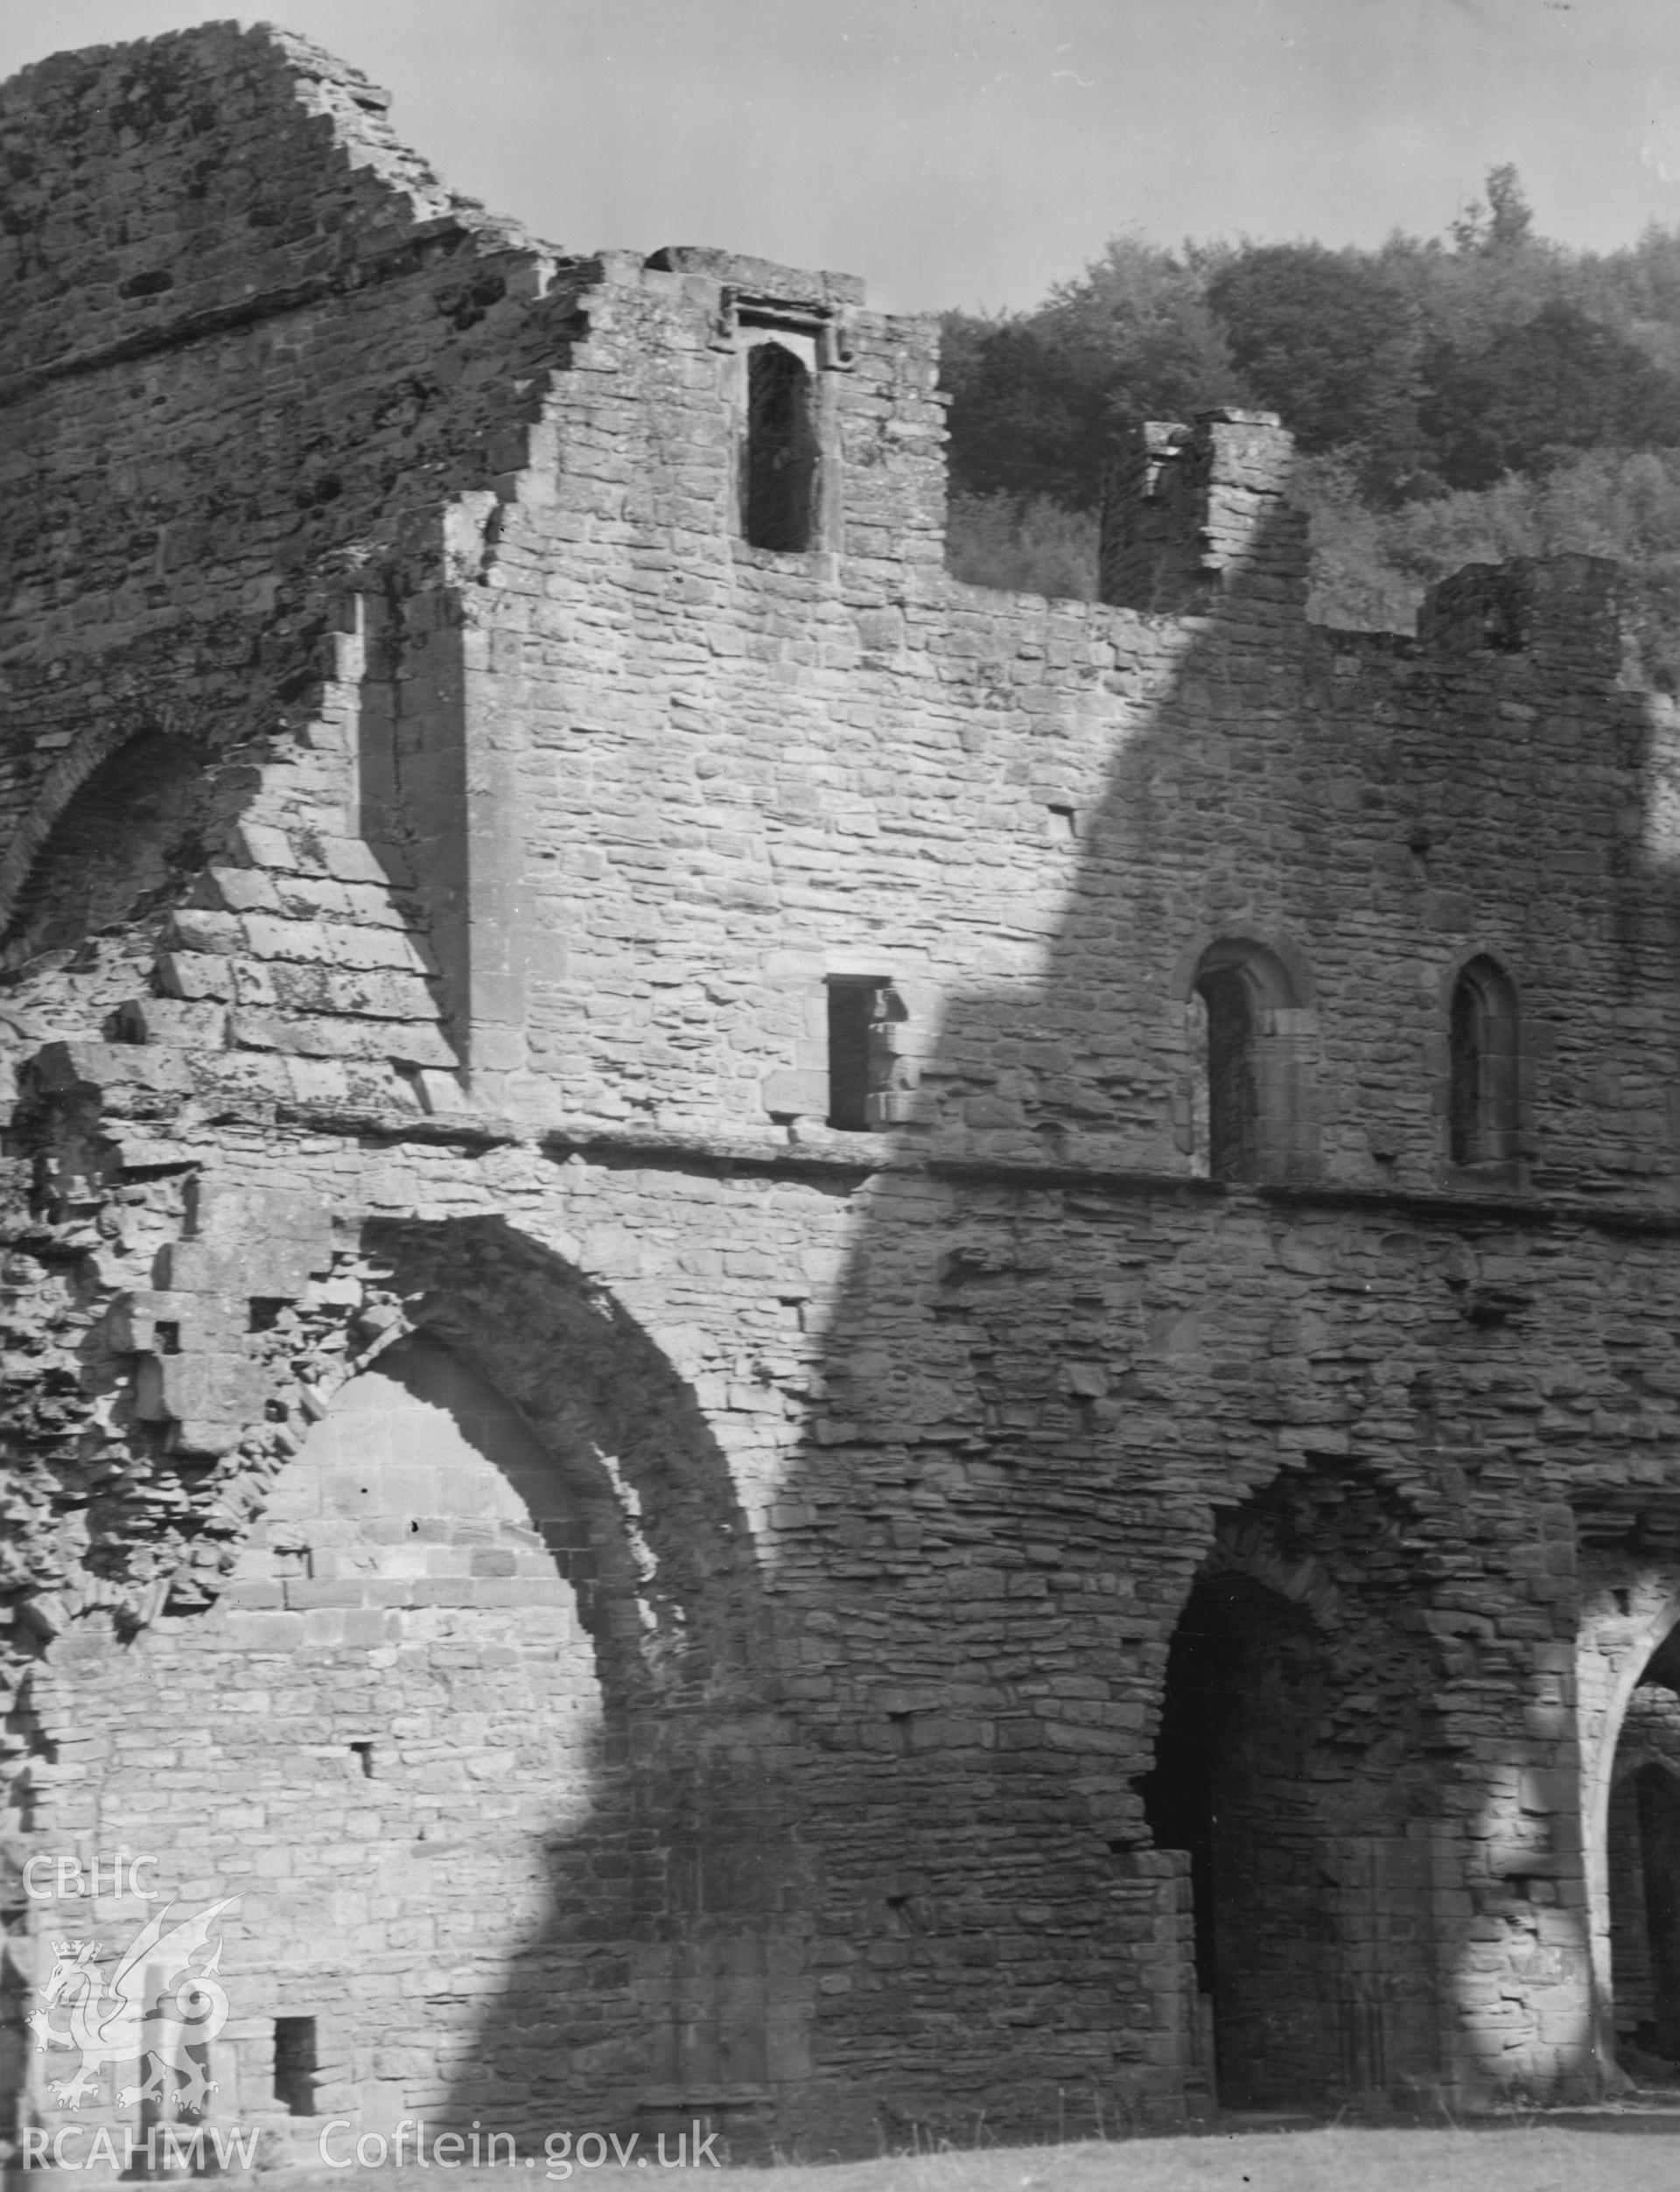 Digital copy of a view of Tintern Abbey taken by Shirley Jones. dated 1943.